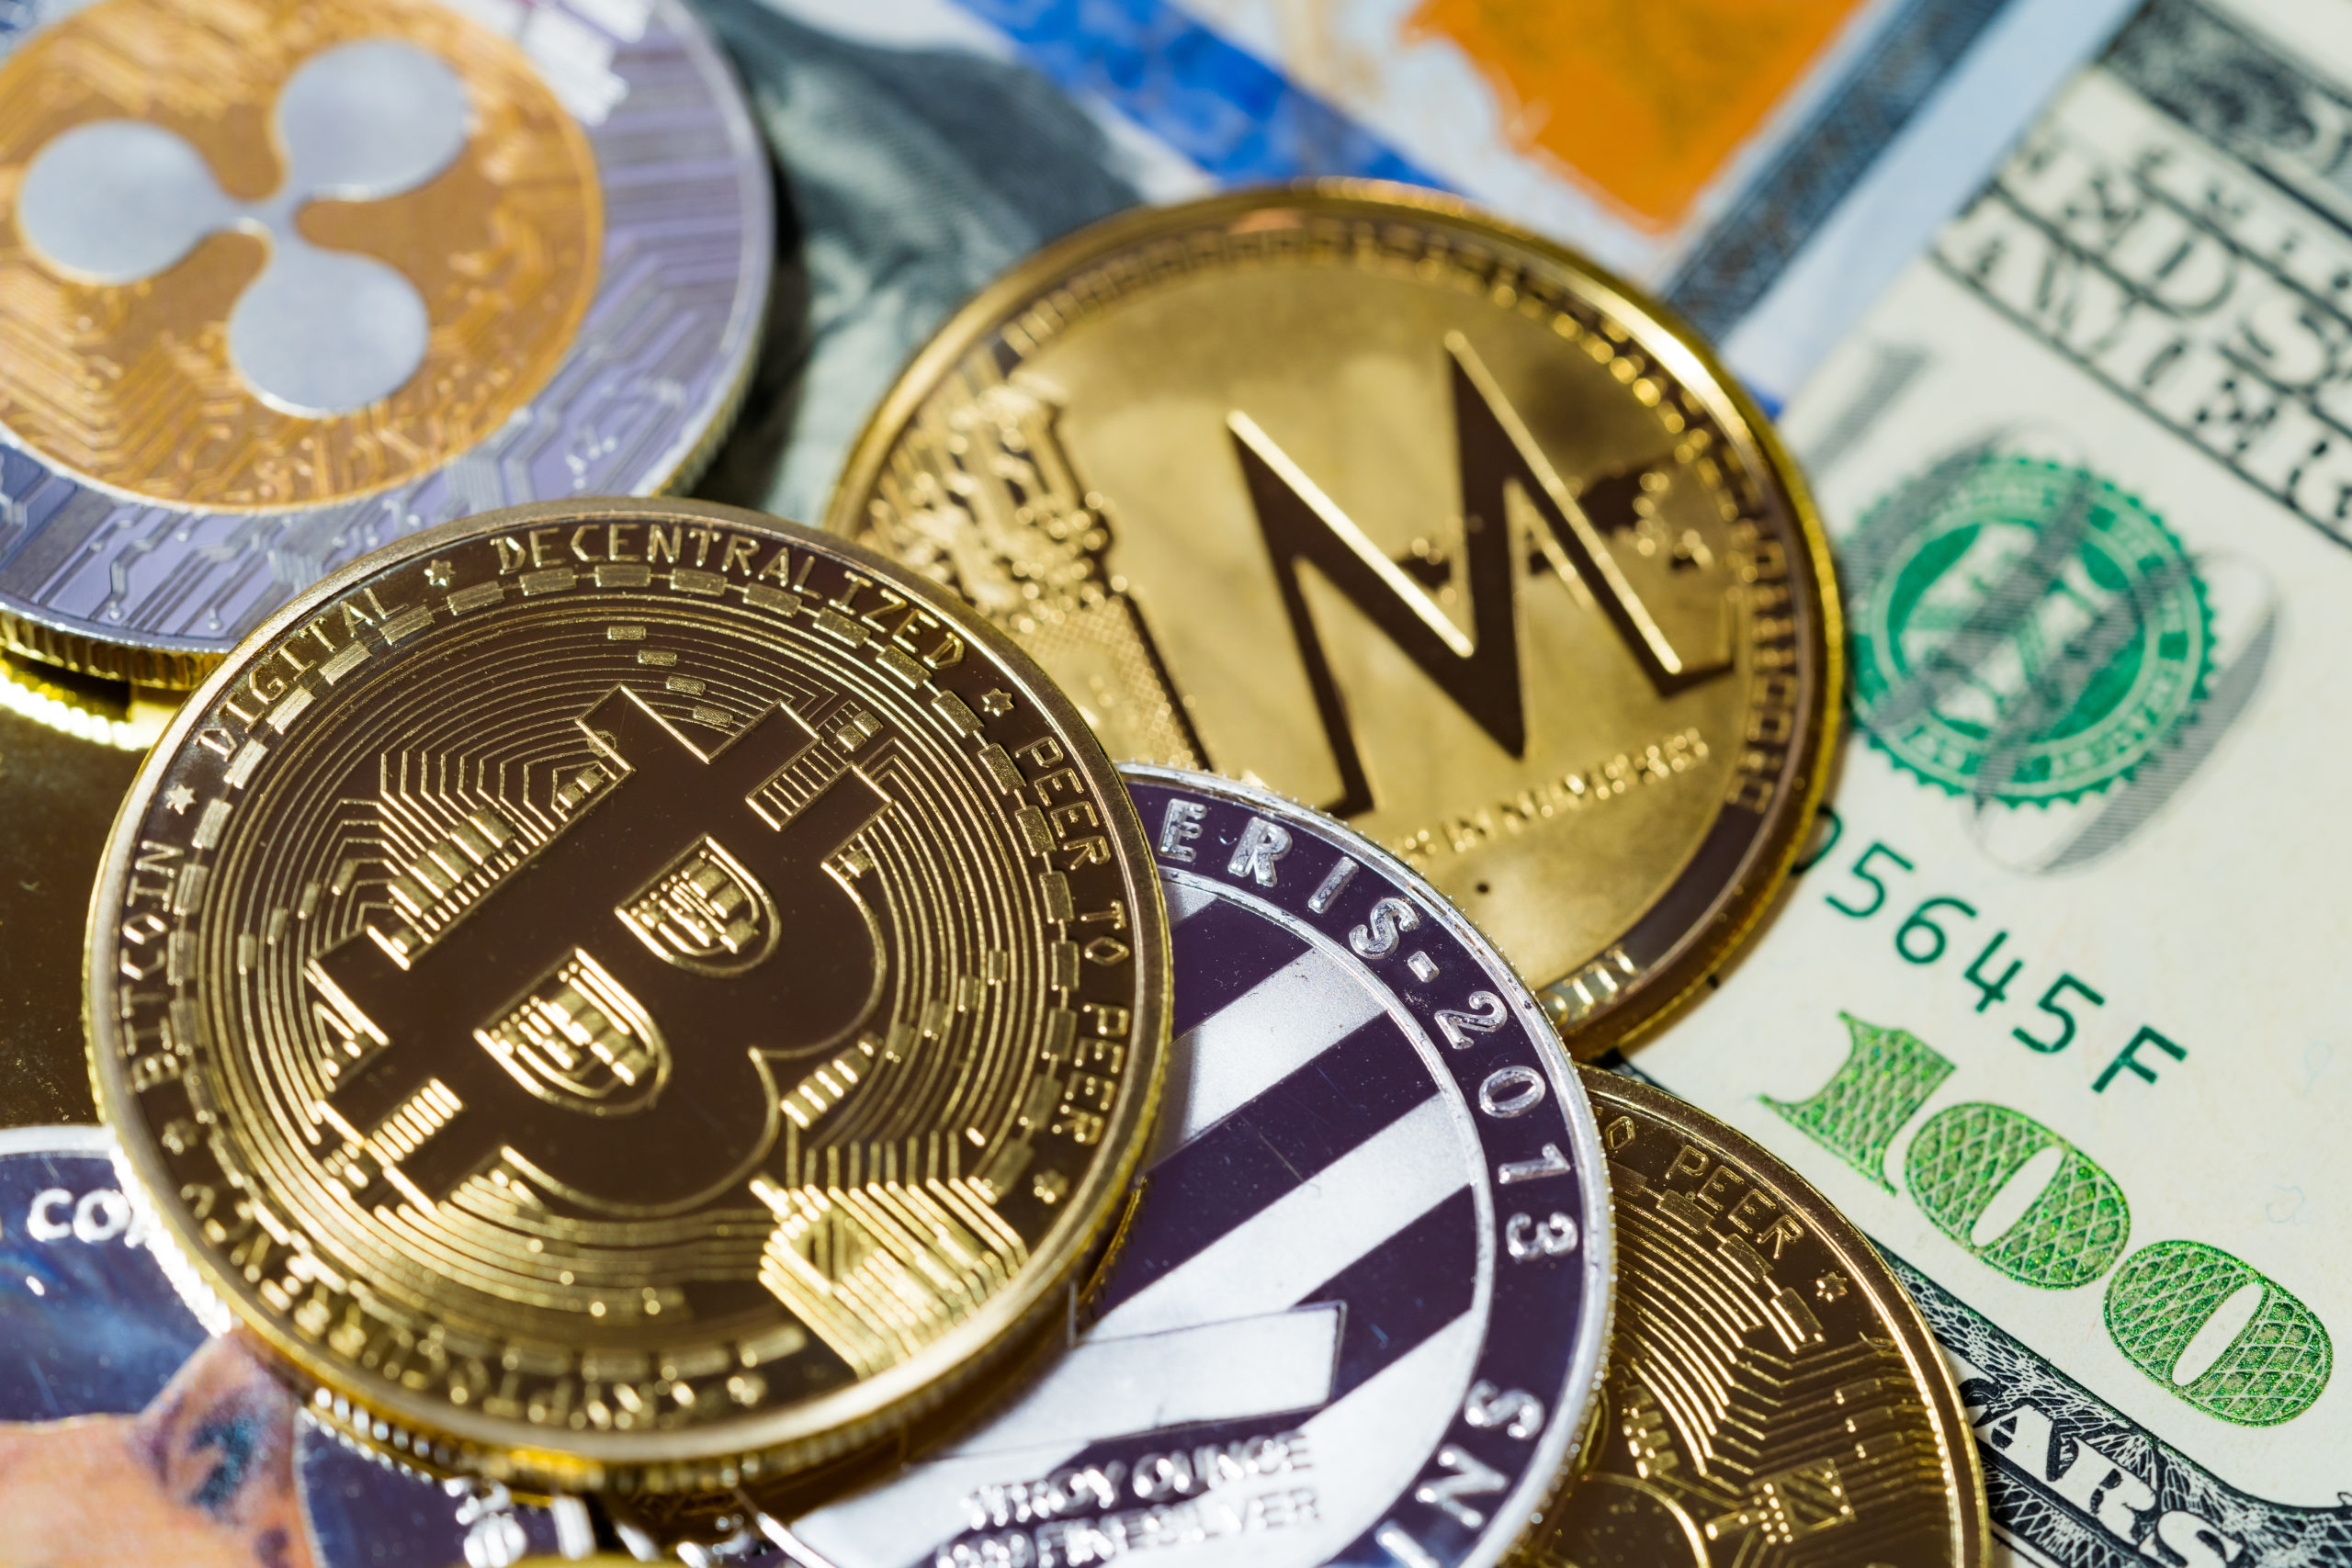 Photo of physical coins depicting different types of cryptocurrencies, on top of a $100 bill